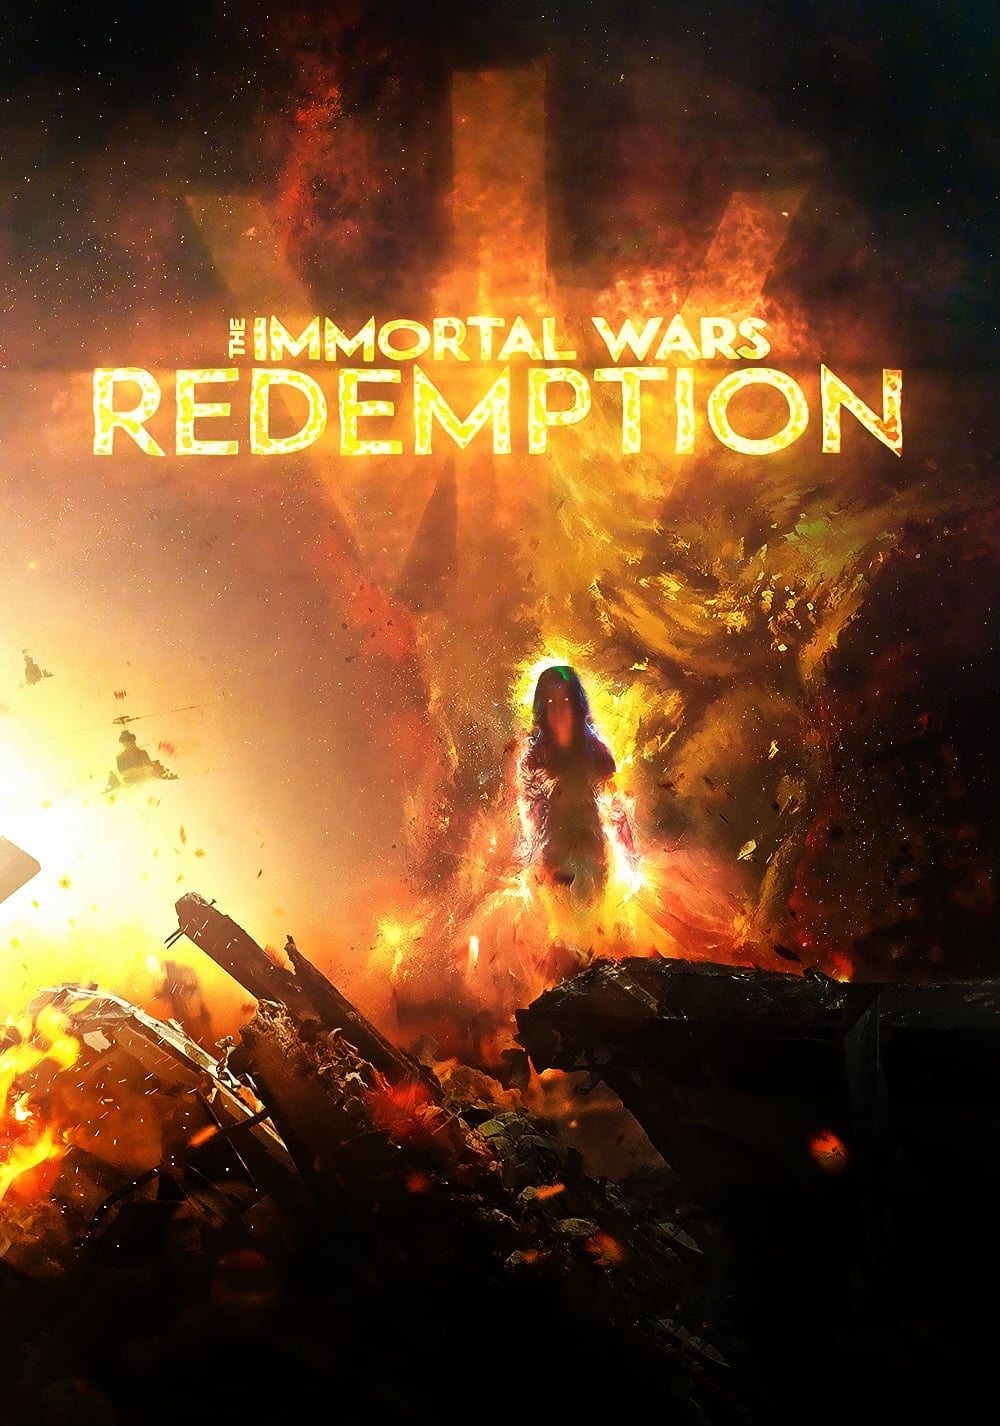 The Immortal Wars: Redemption